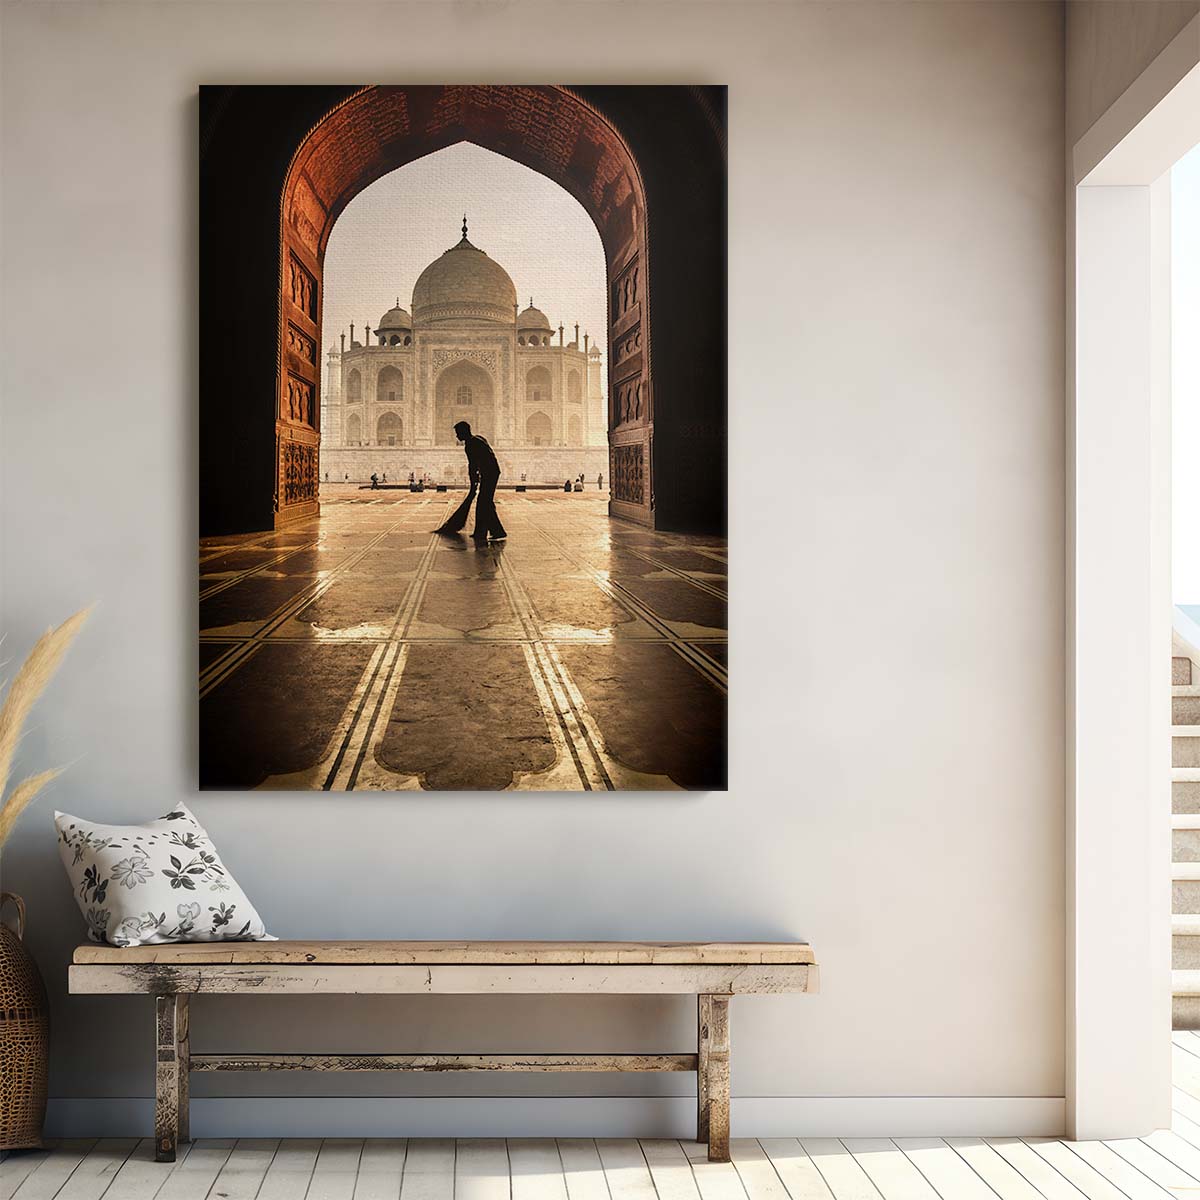 Dawn Cleaning at Taj Mahal - Iconic Indian Architecture Photography Art by Luxuriance Designs, made in USA